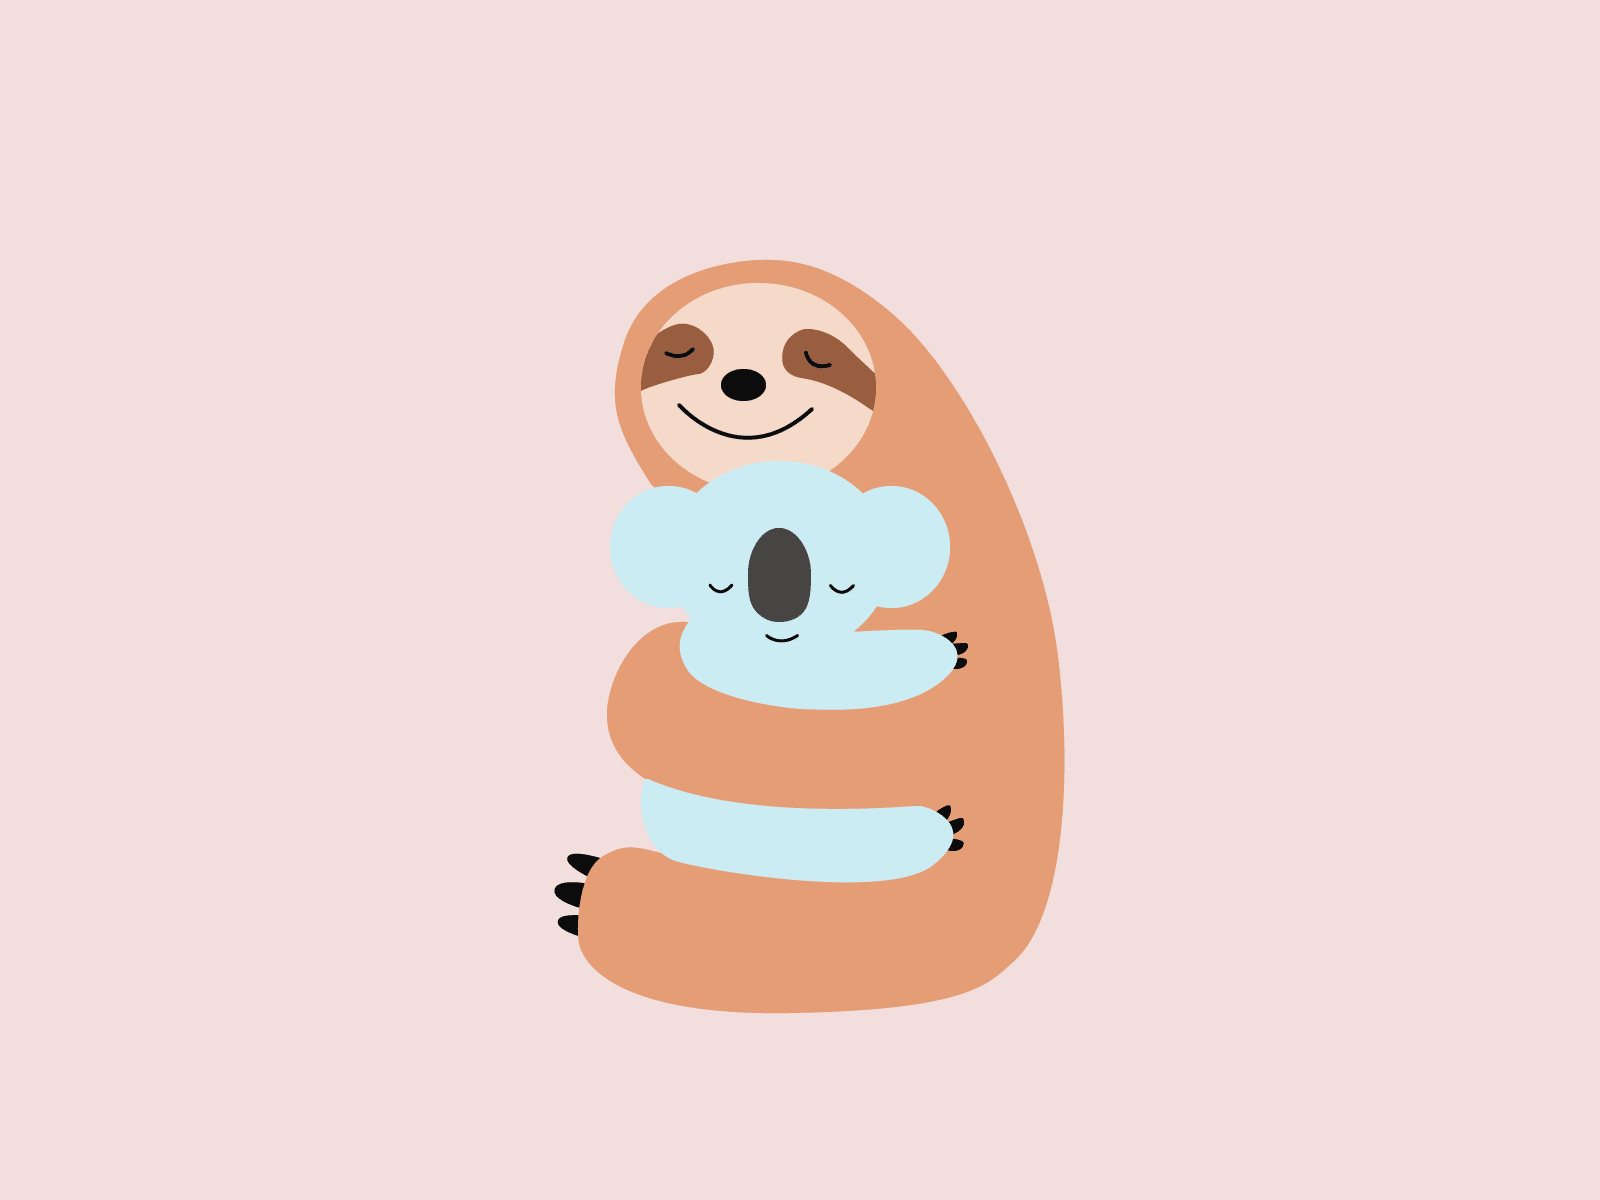 sloth hugs adobe after effects adobe illustrator animals animation character character animation character design collaboration design easy animation hugs illustration love sloth